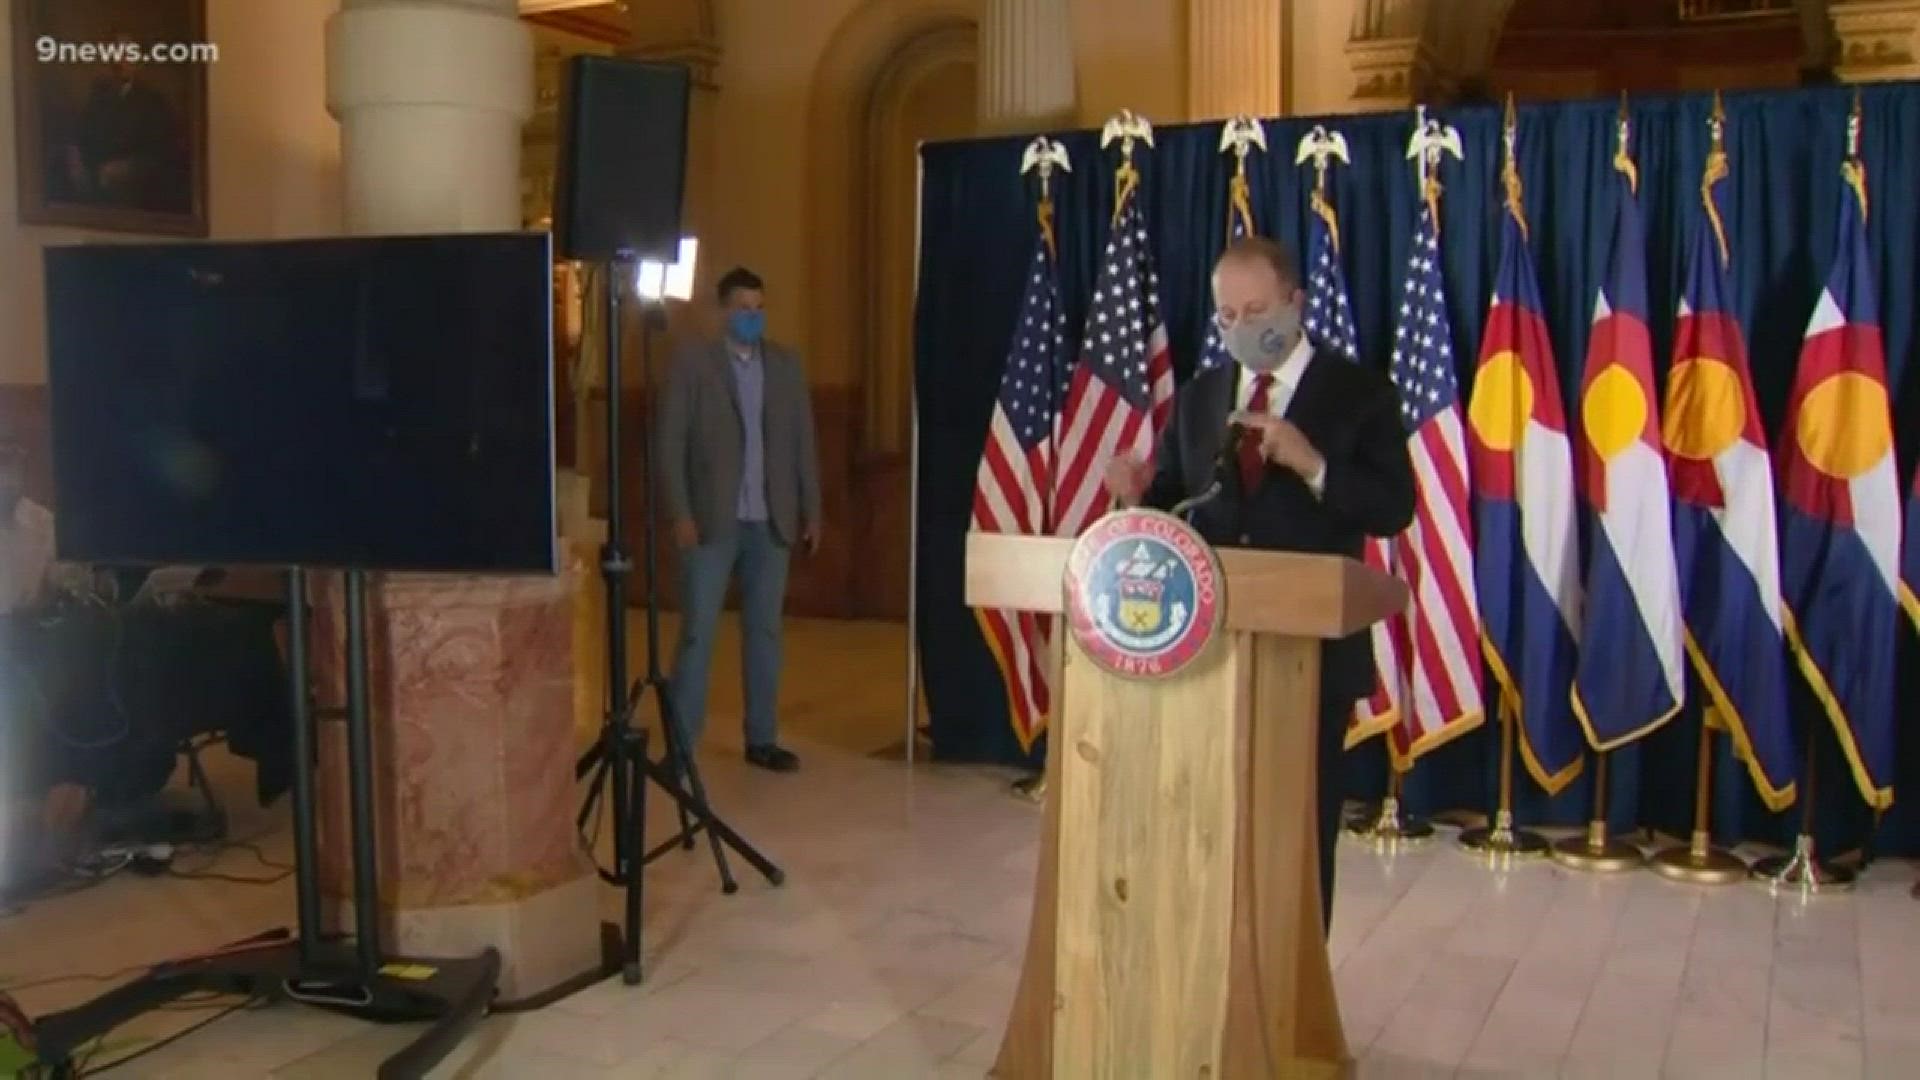 The governor asks Coloradan to join in a moment of silence to honor those who have died from COVID-19.